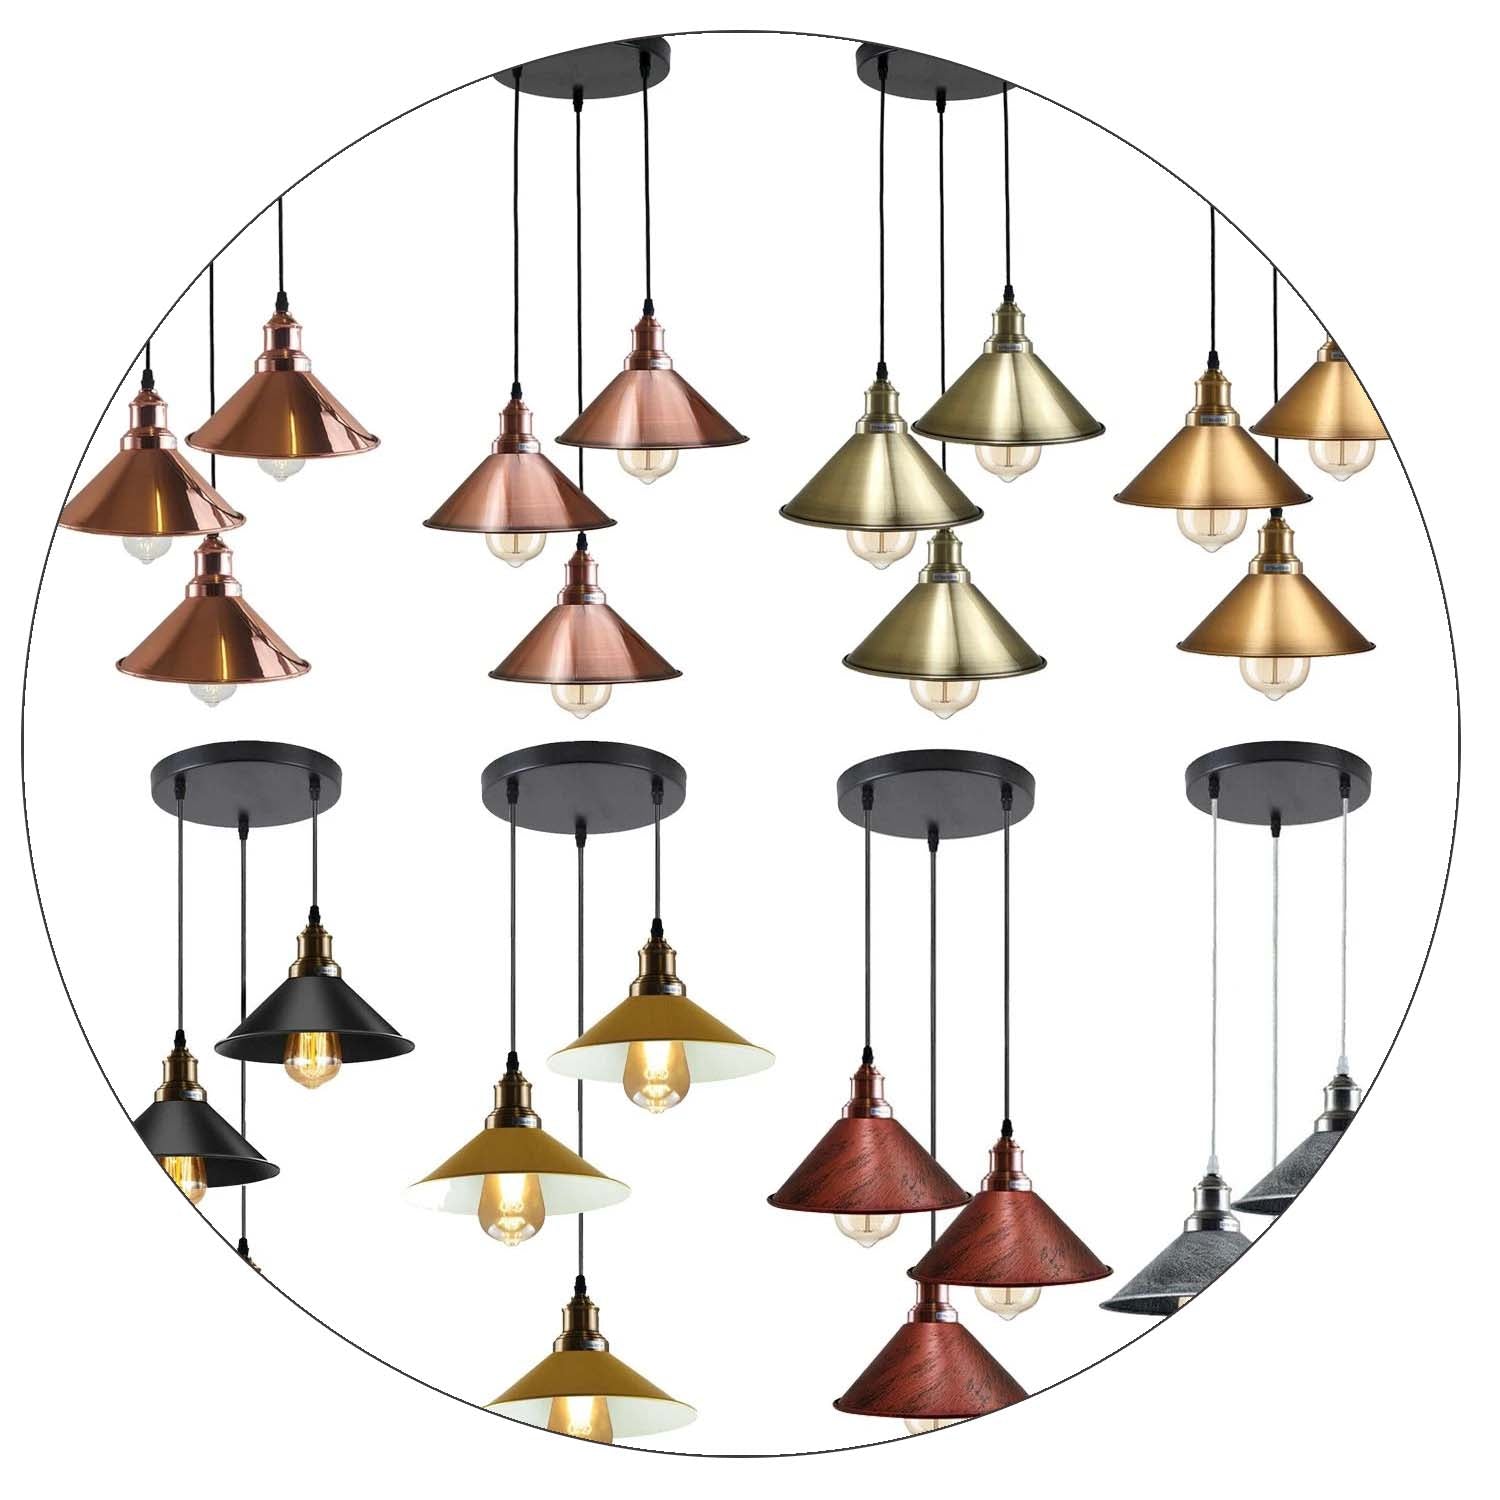 3 Head Ceiling Light, Multi Color Cluster Ceiling Hanging Lamp, Pendant Light Fixture with Cone Metal Shade~1302 - LEDSone UK Ltd